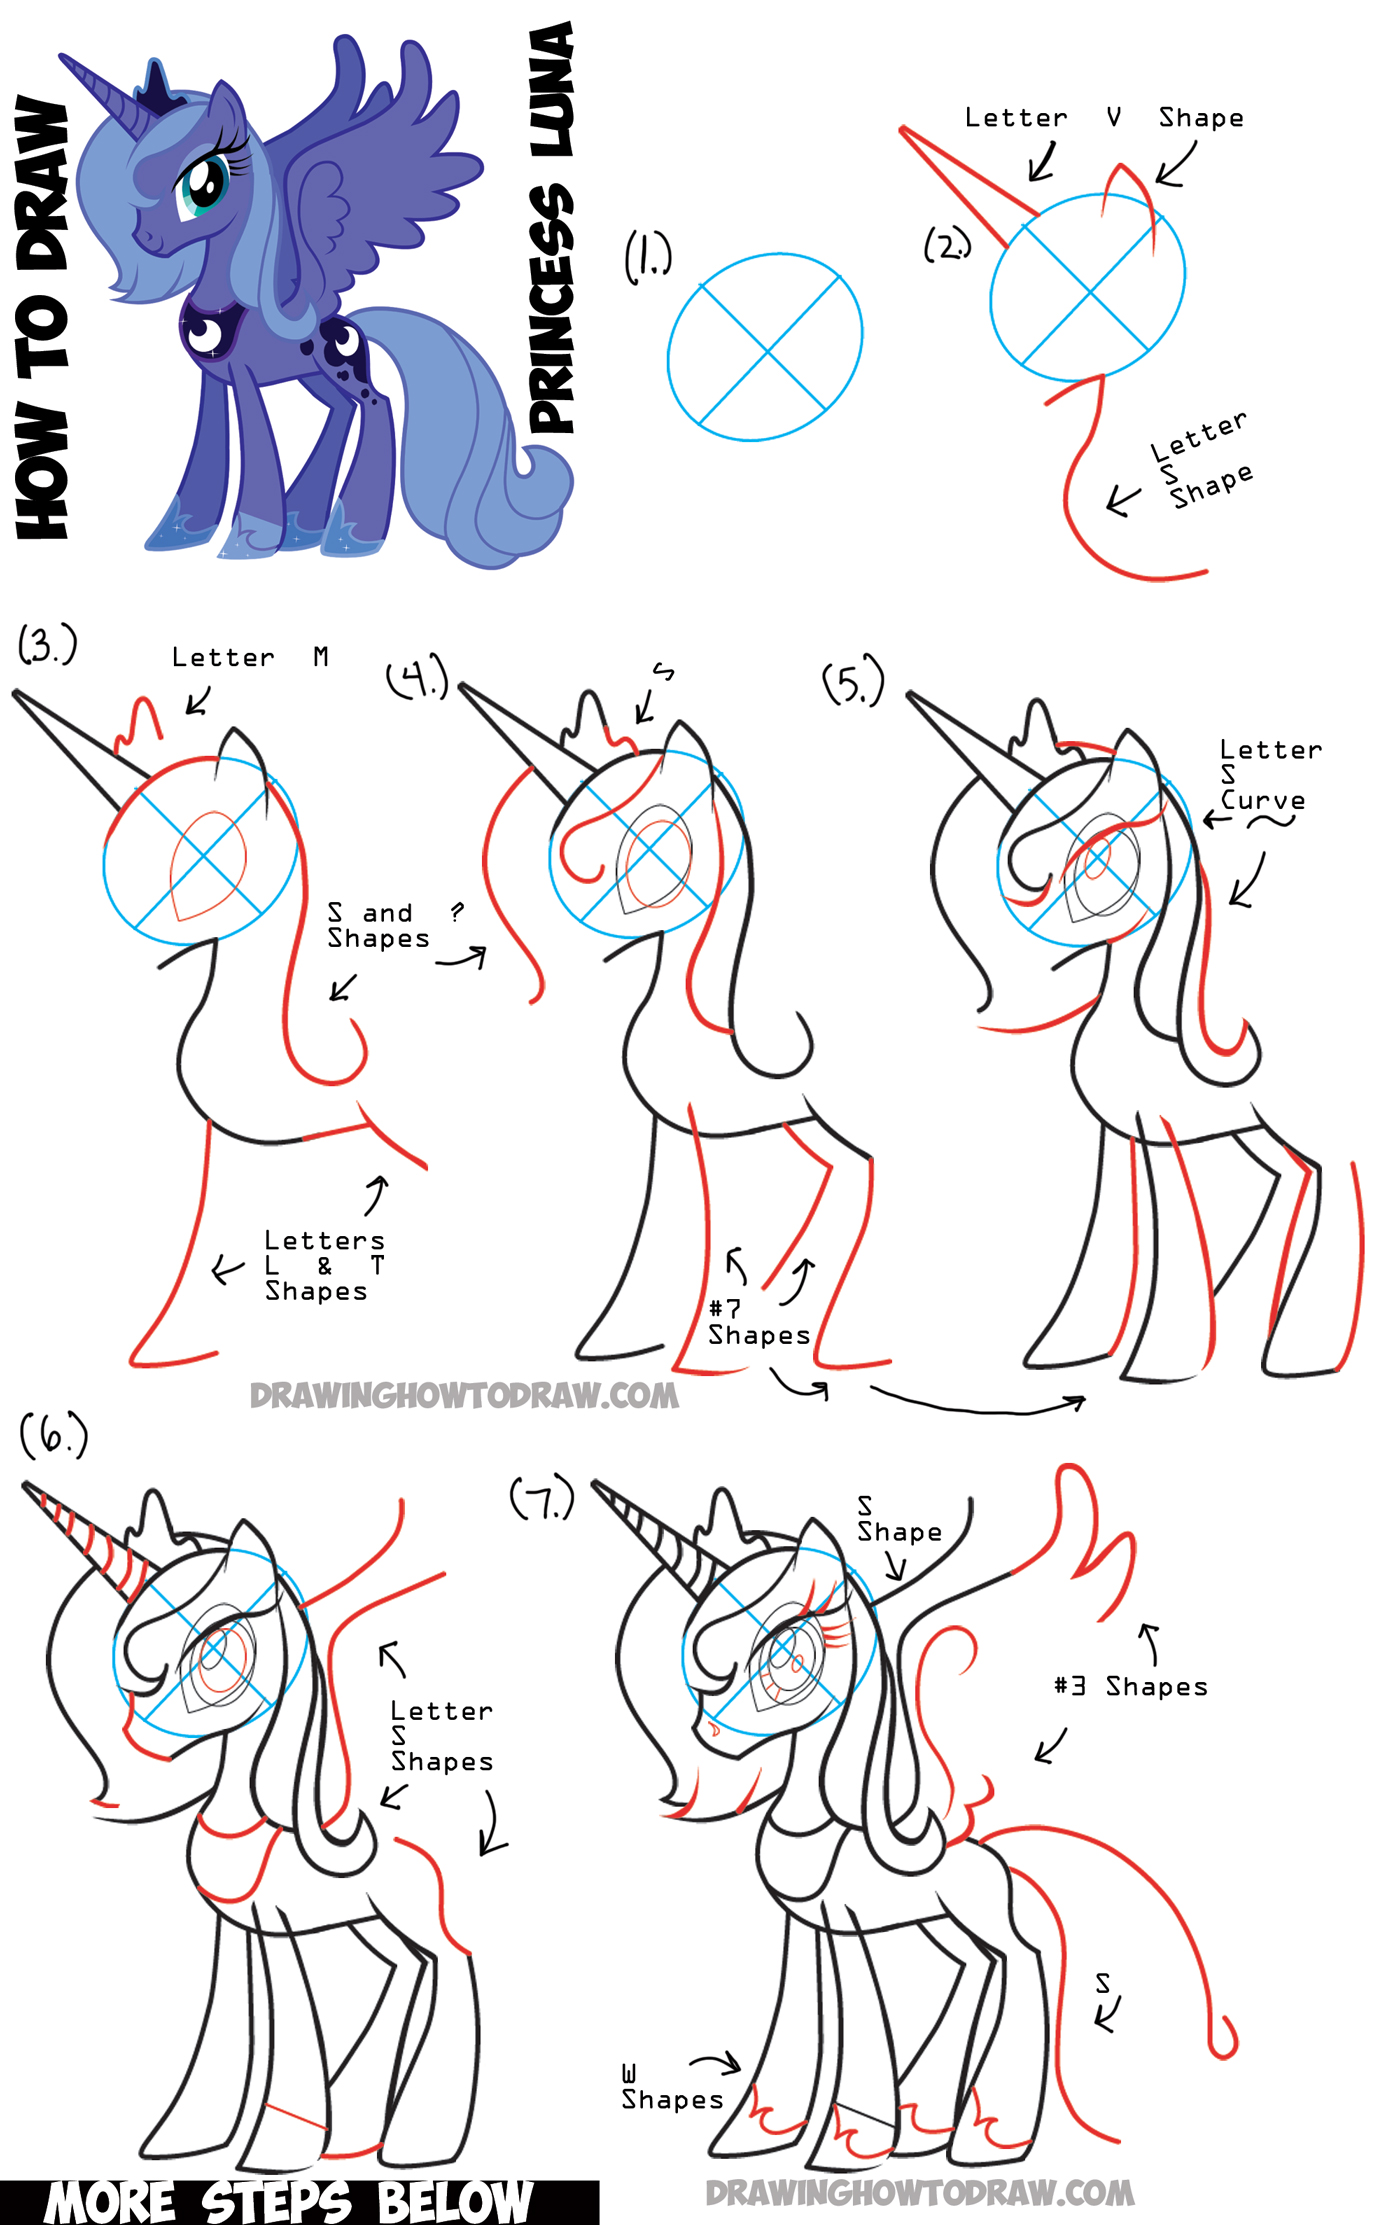 How to Draw Princess Luna from My Little Pony Friendship is Magic : Easy Step by Step Drawing Tutorial